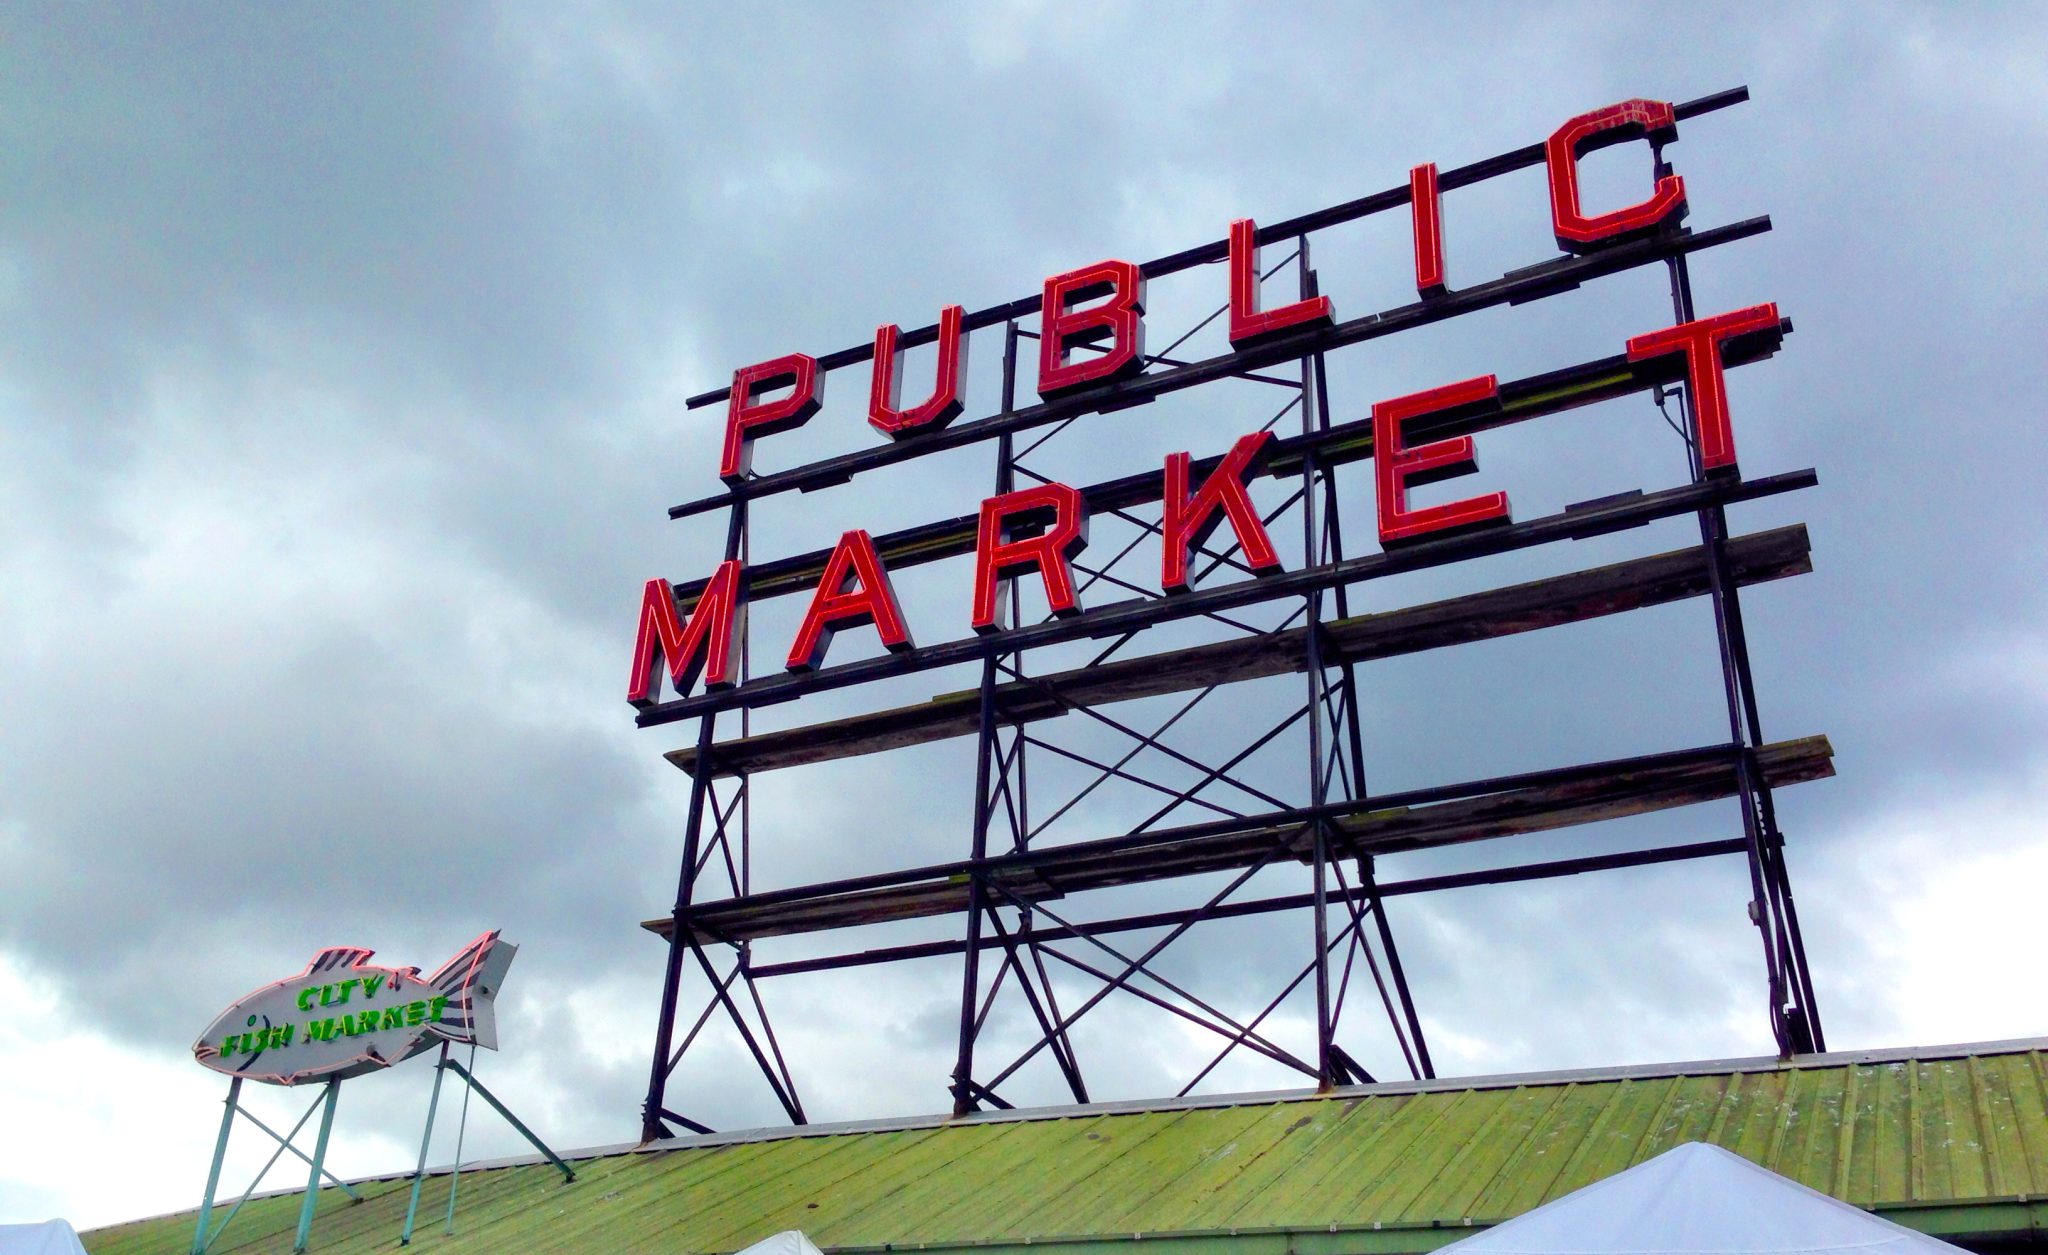 Pikes Public Market Sign In Seattle